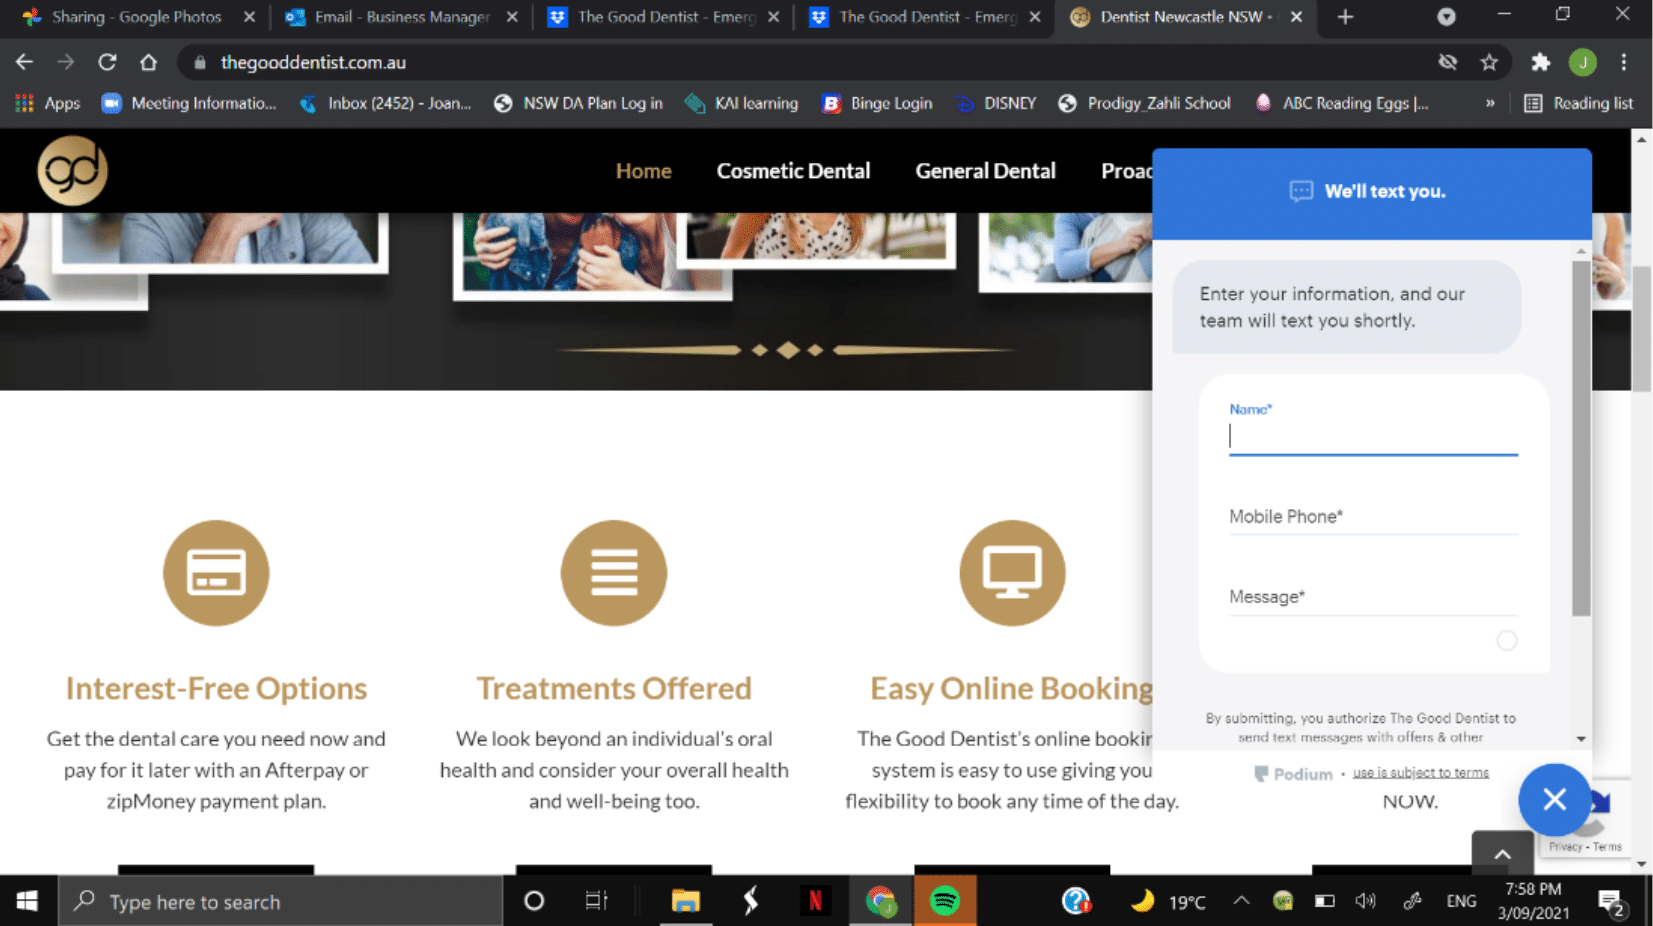 booking appointment online